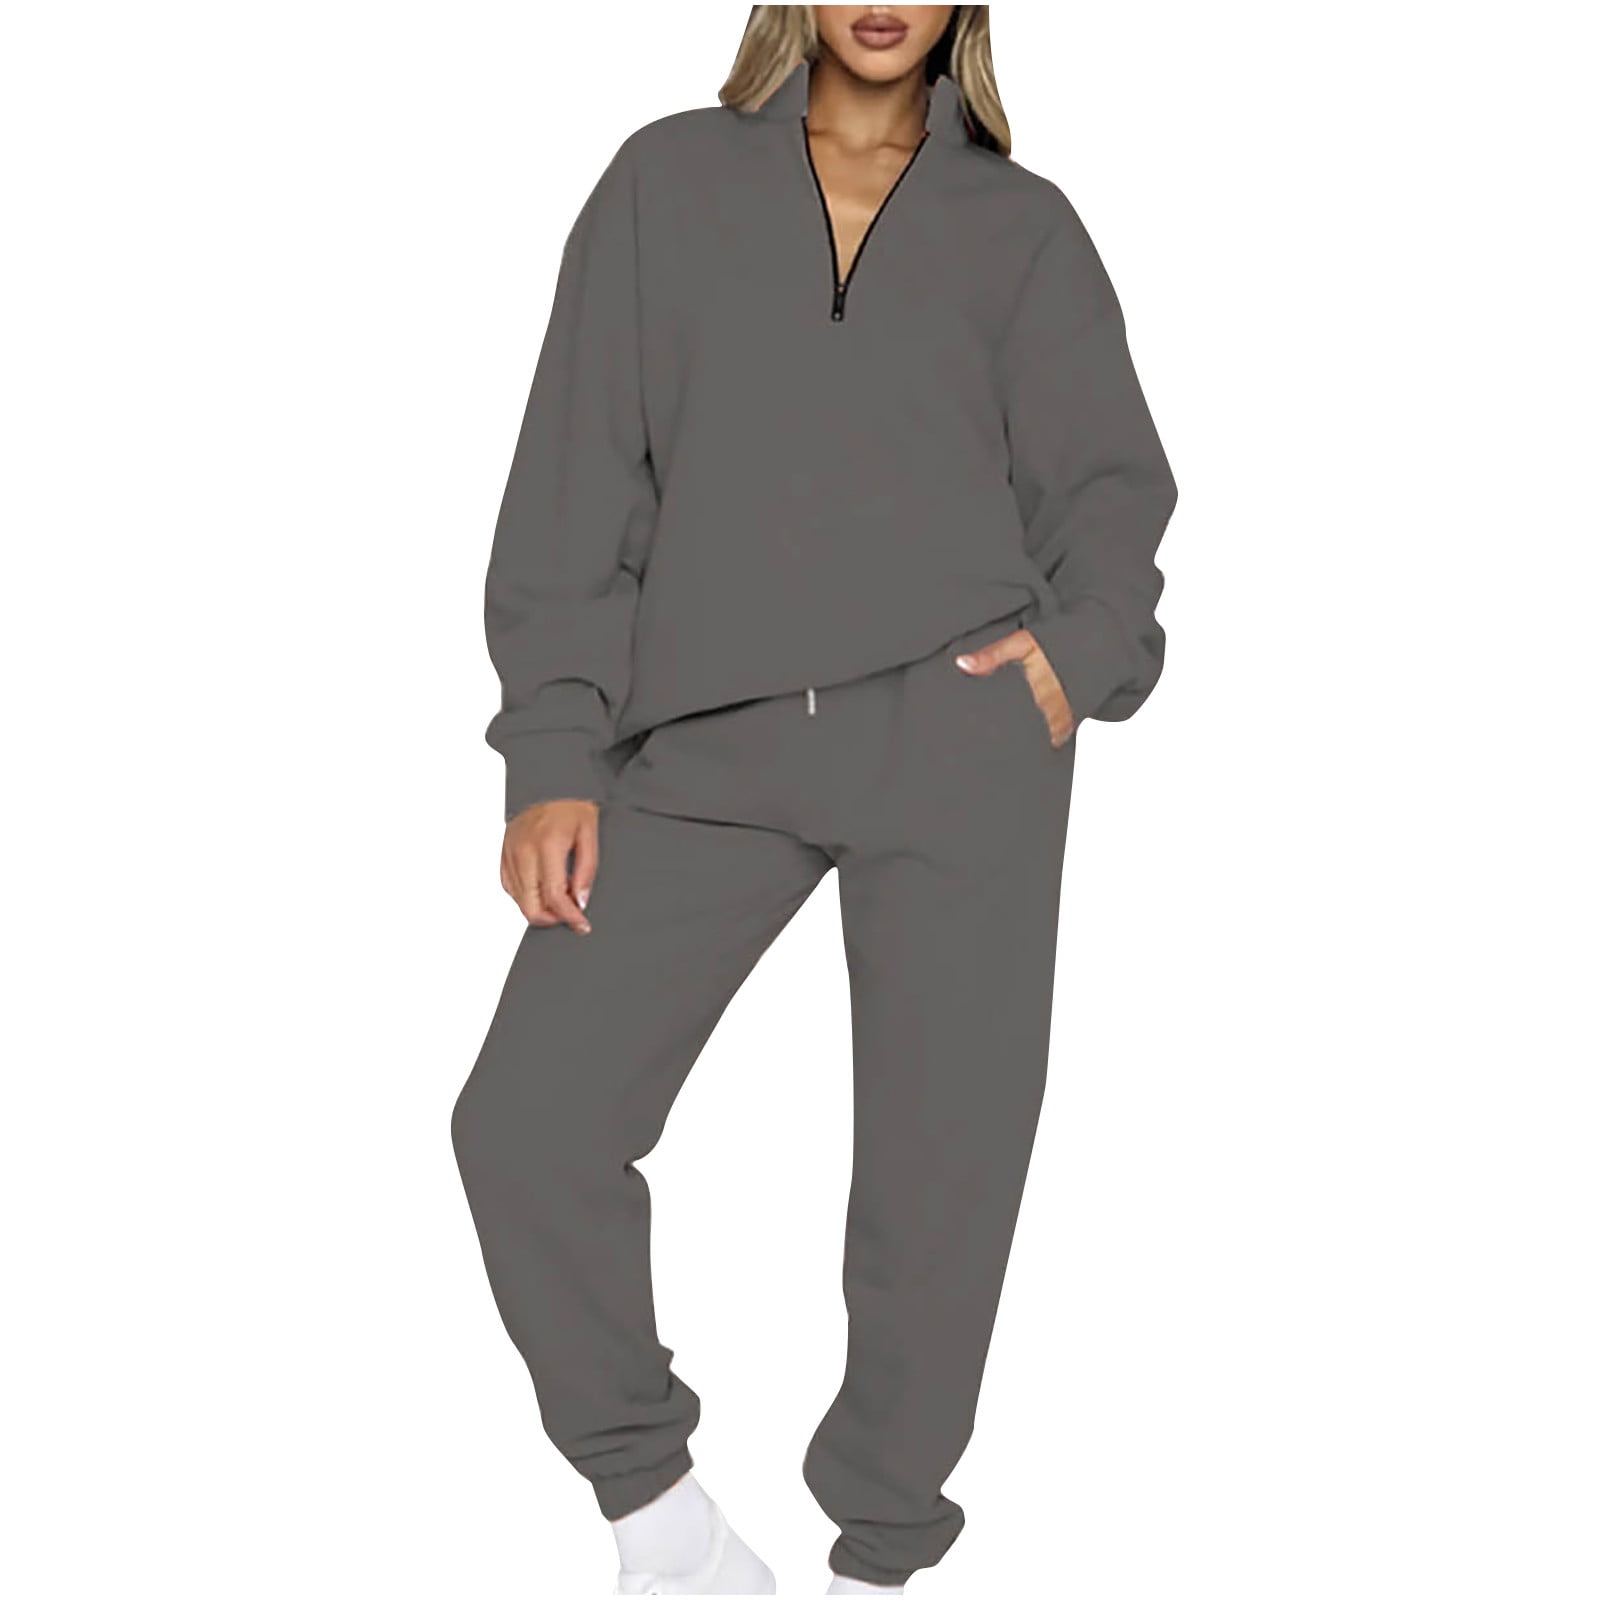 RQYYD Two Piece Lounge Set for Women 2 Piece Outfits Sweatsuit ...